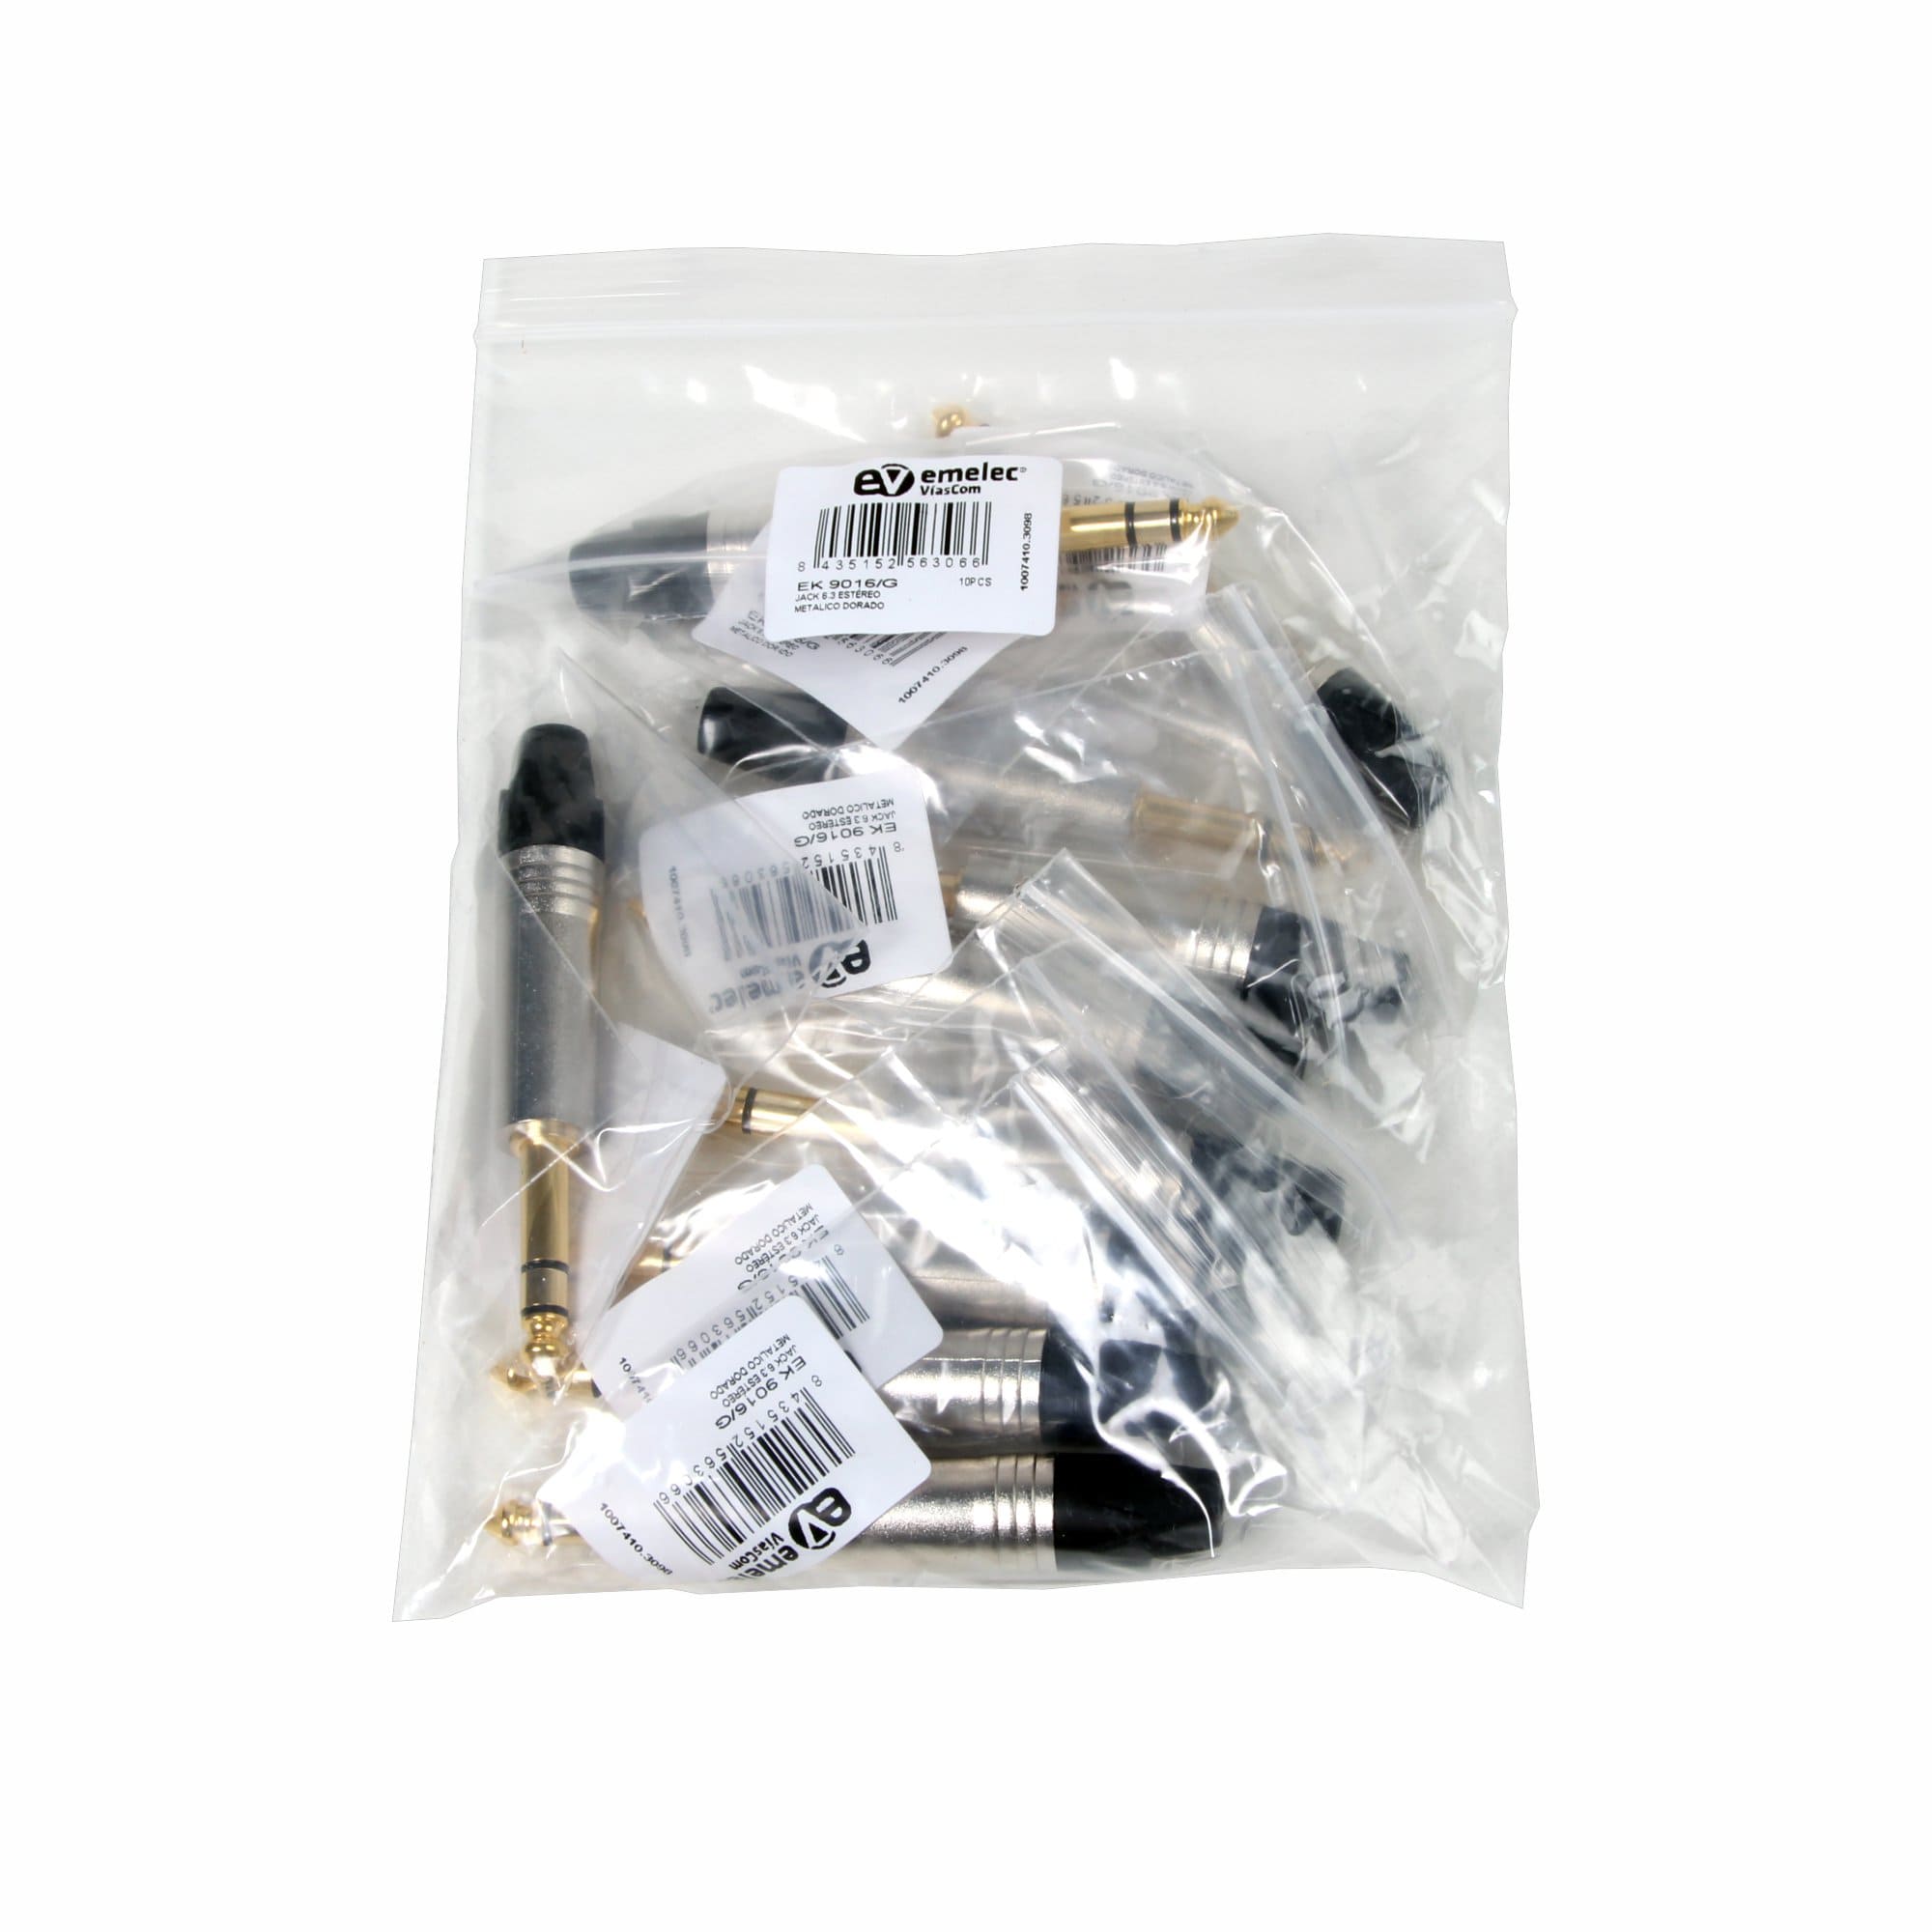 Plastic bag with 10 Jack 6.3 male stereo gold-plated plugs from Emelec ViasCom